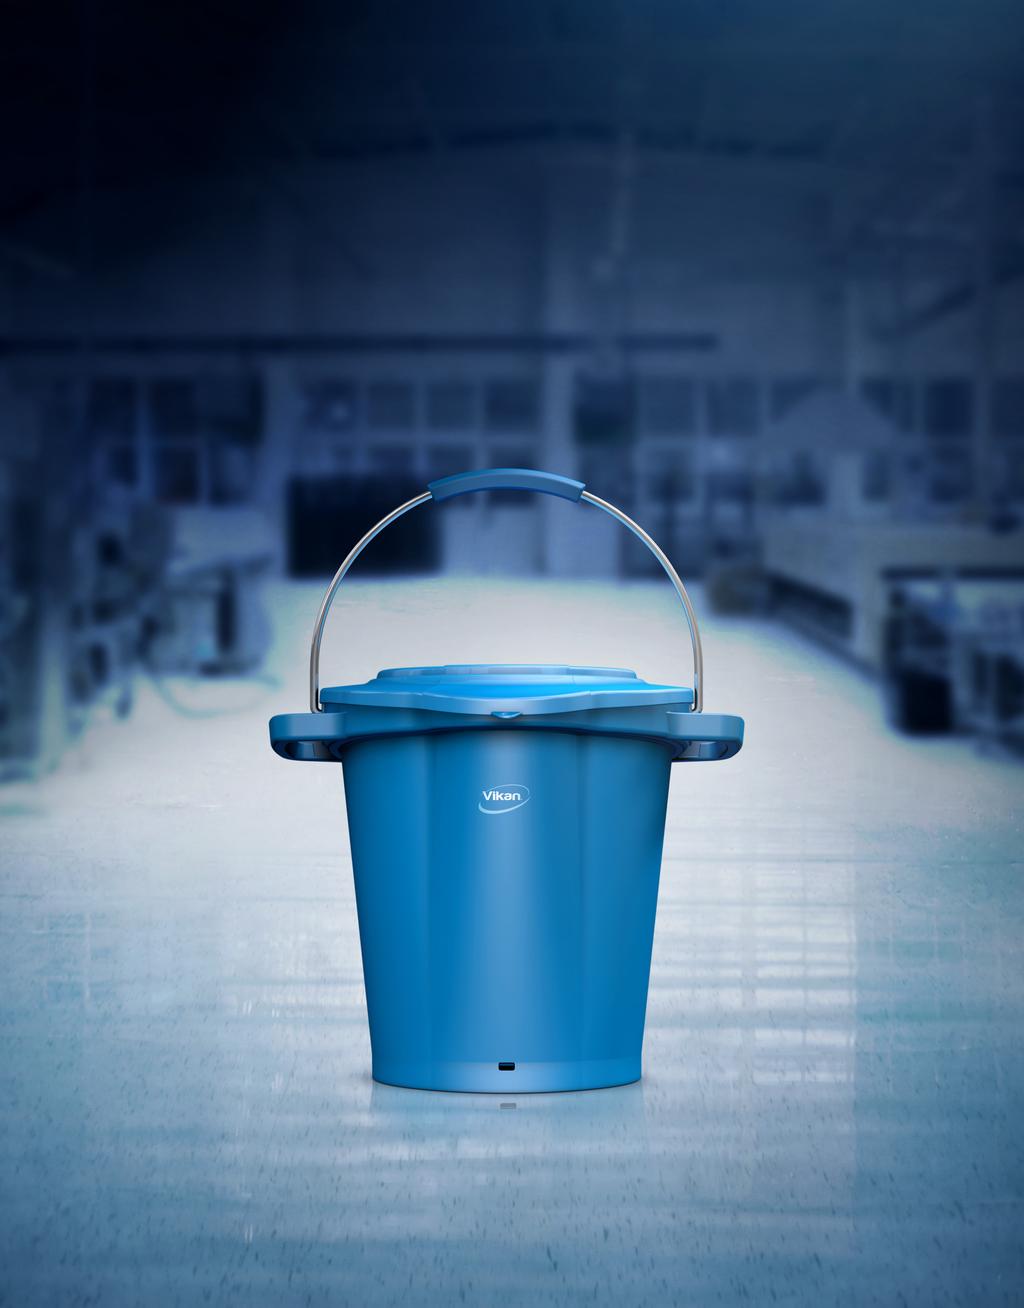 This Bucket Means Business Multi-purpose functionality, hygienic design and